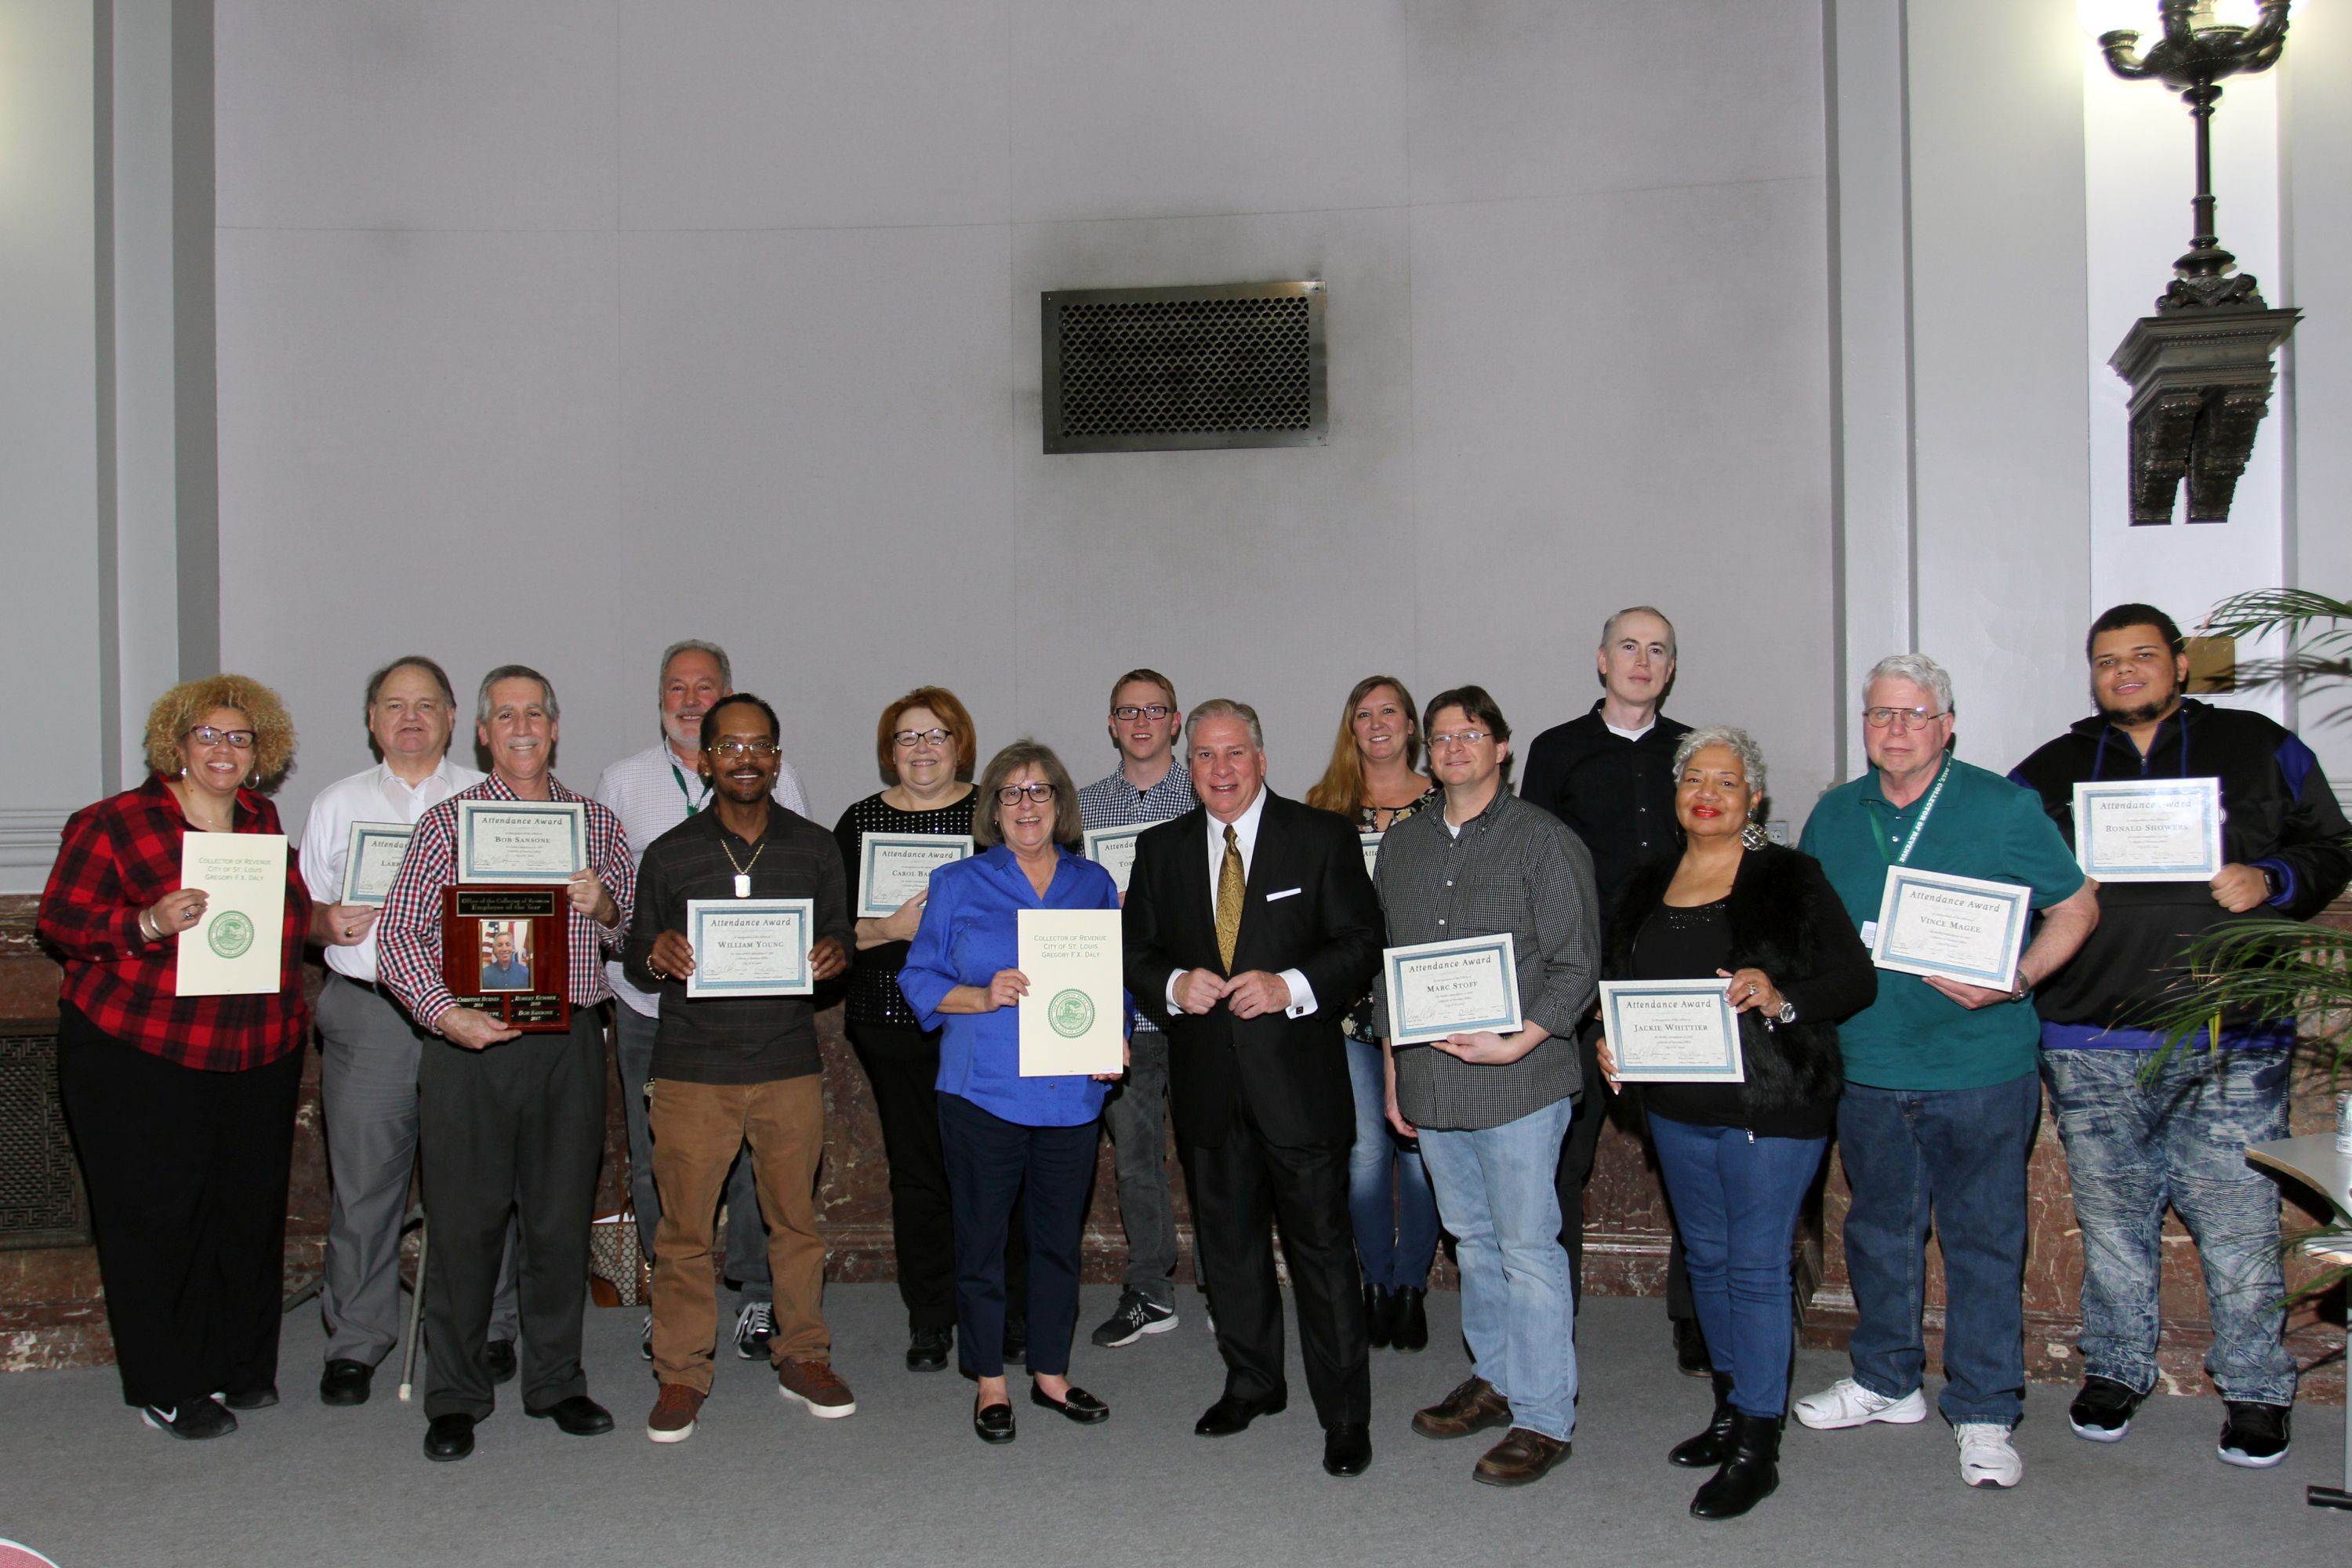 Group photo of COR employees honored at recognition ceremony